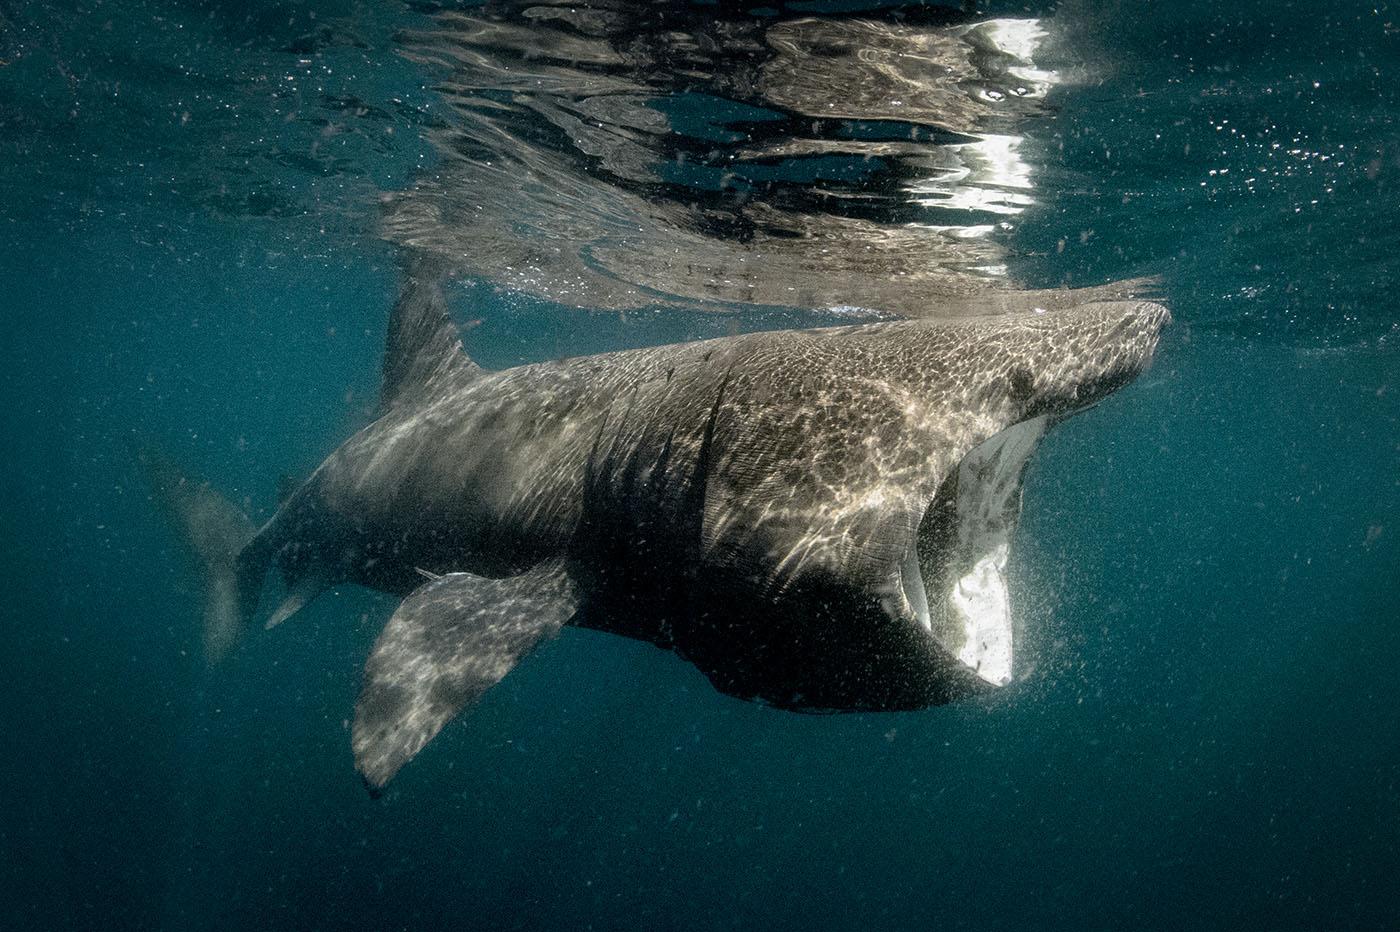 A basking shark, the second largest fish in the world. Photo: George Karbus